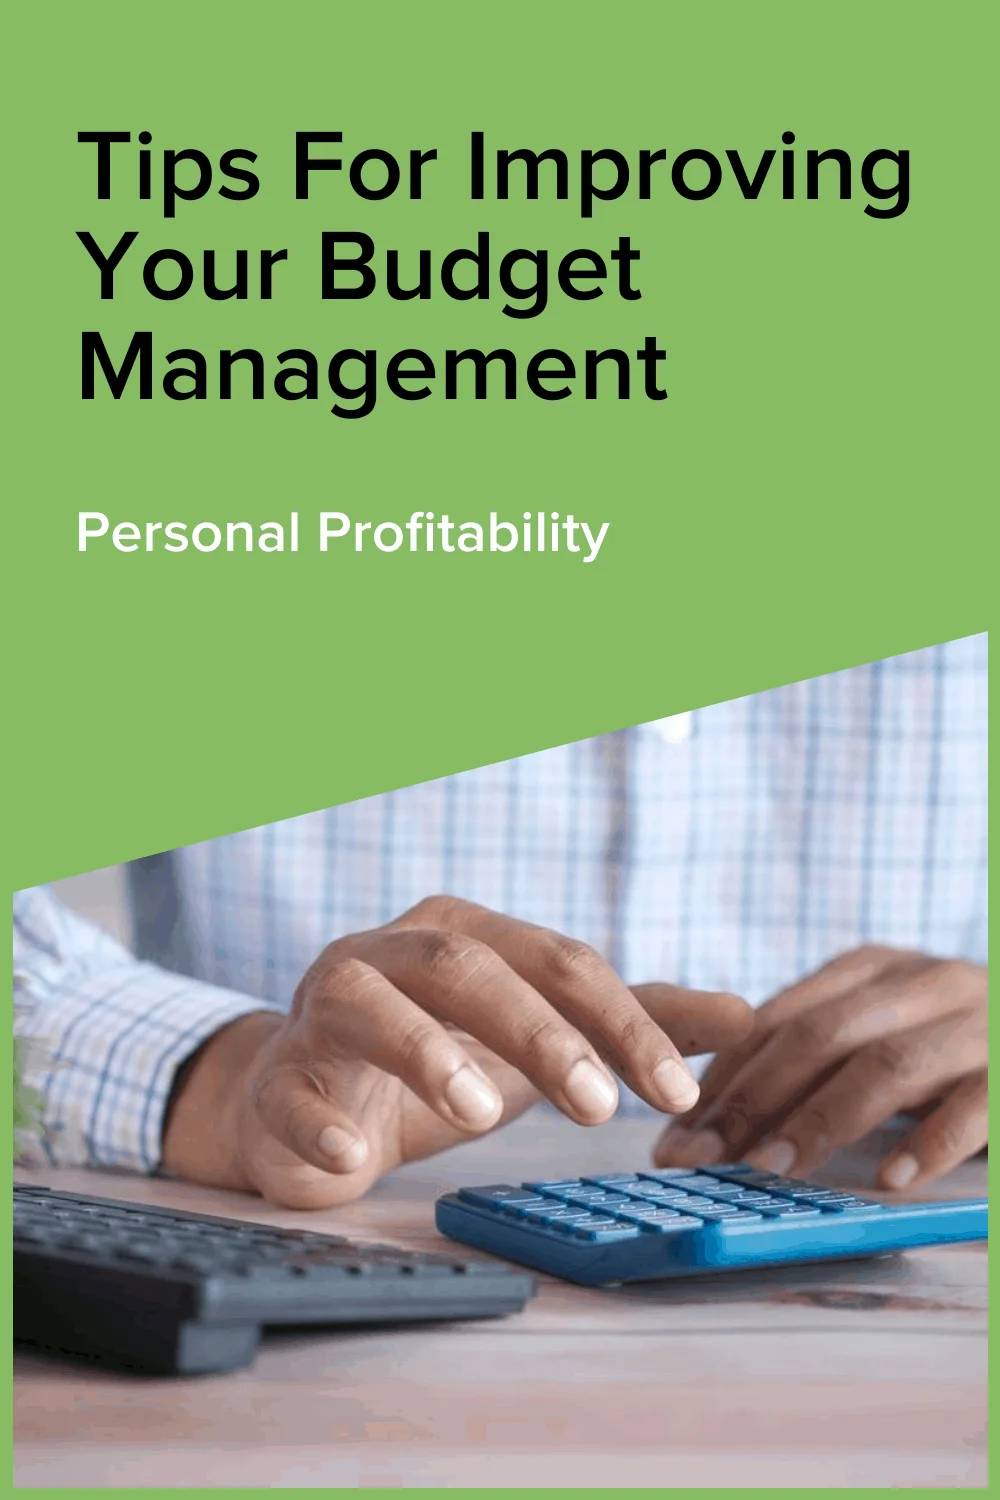 Tips for Improving Your Budget Management